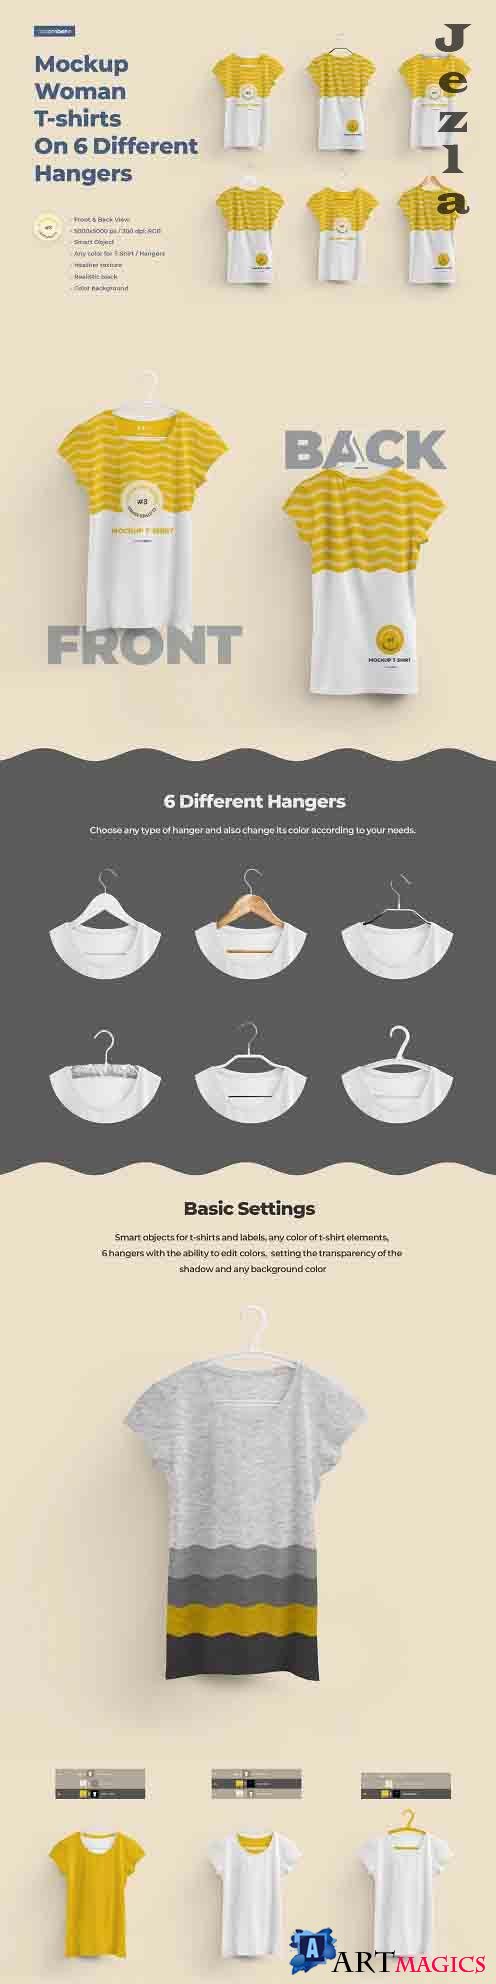 2 Mockups Woman T-shirts On 6 Different Hangers  - 27659659